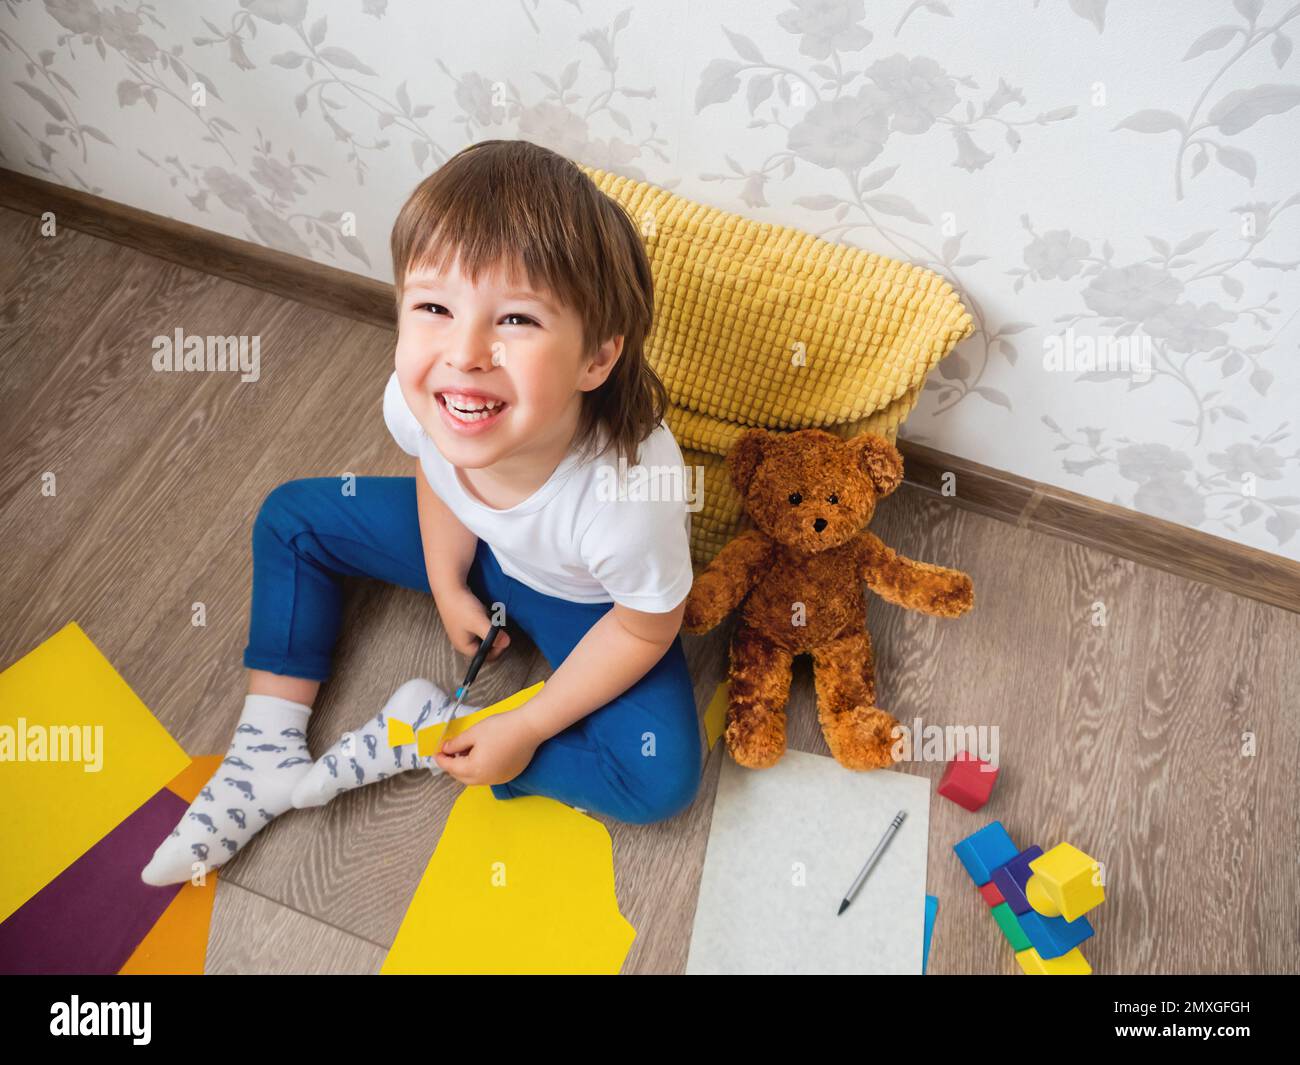 Toddler boy learns to cut colored paper with scissors. Kid sits on floor in kids room with toy blocks and teddy bear. Educational classes for children Stock Photo